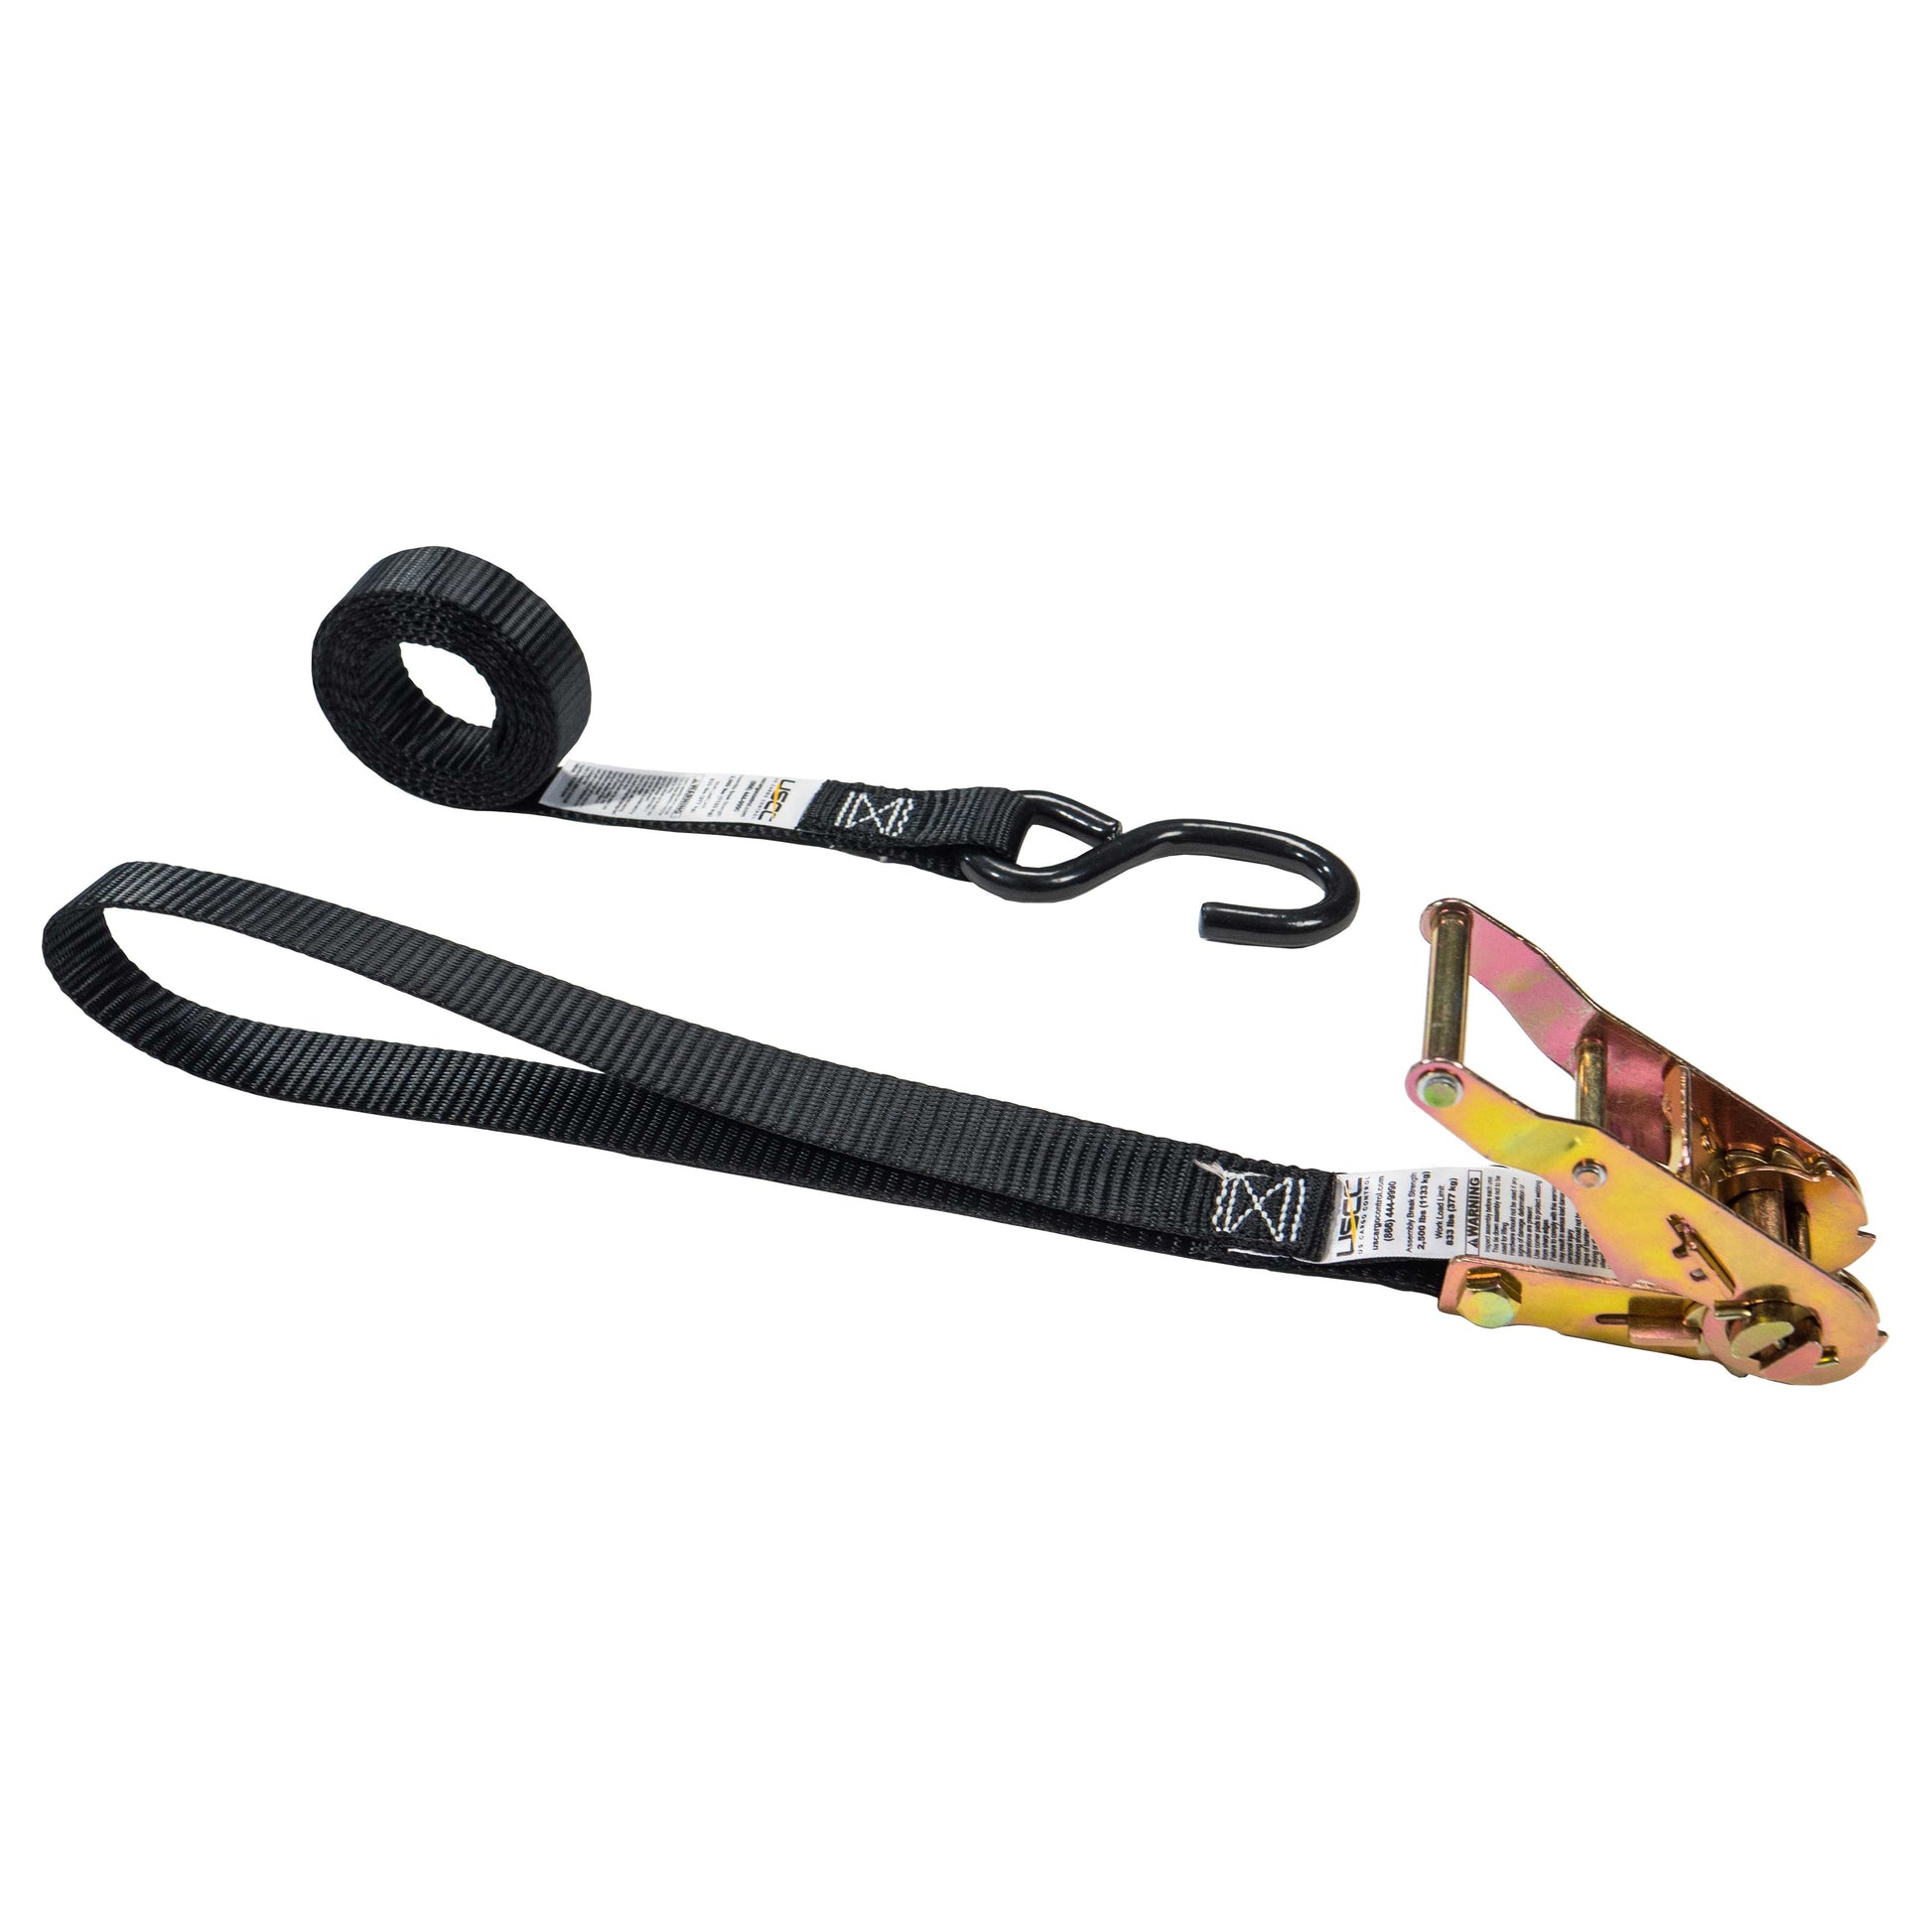 Motorcycle tie down system -1 x 6' ratchet strap w/ sewn loop